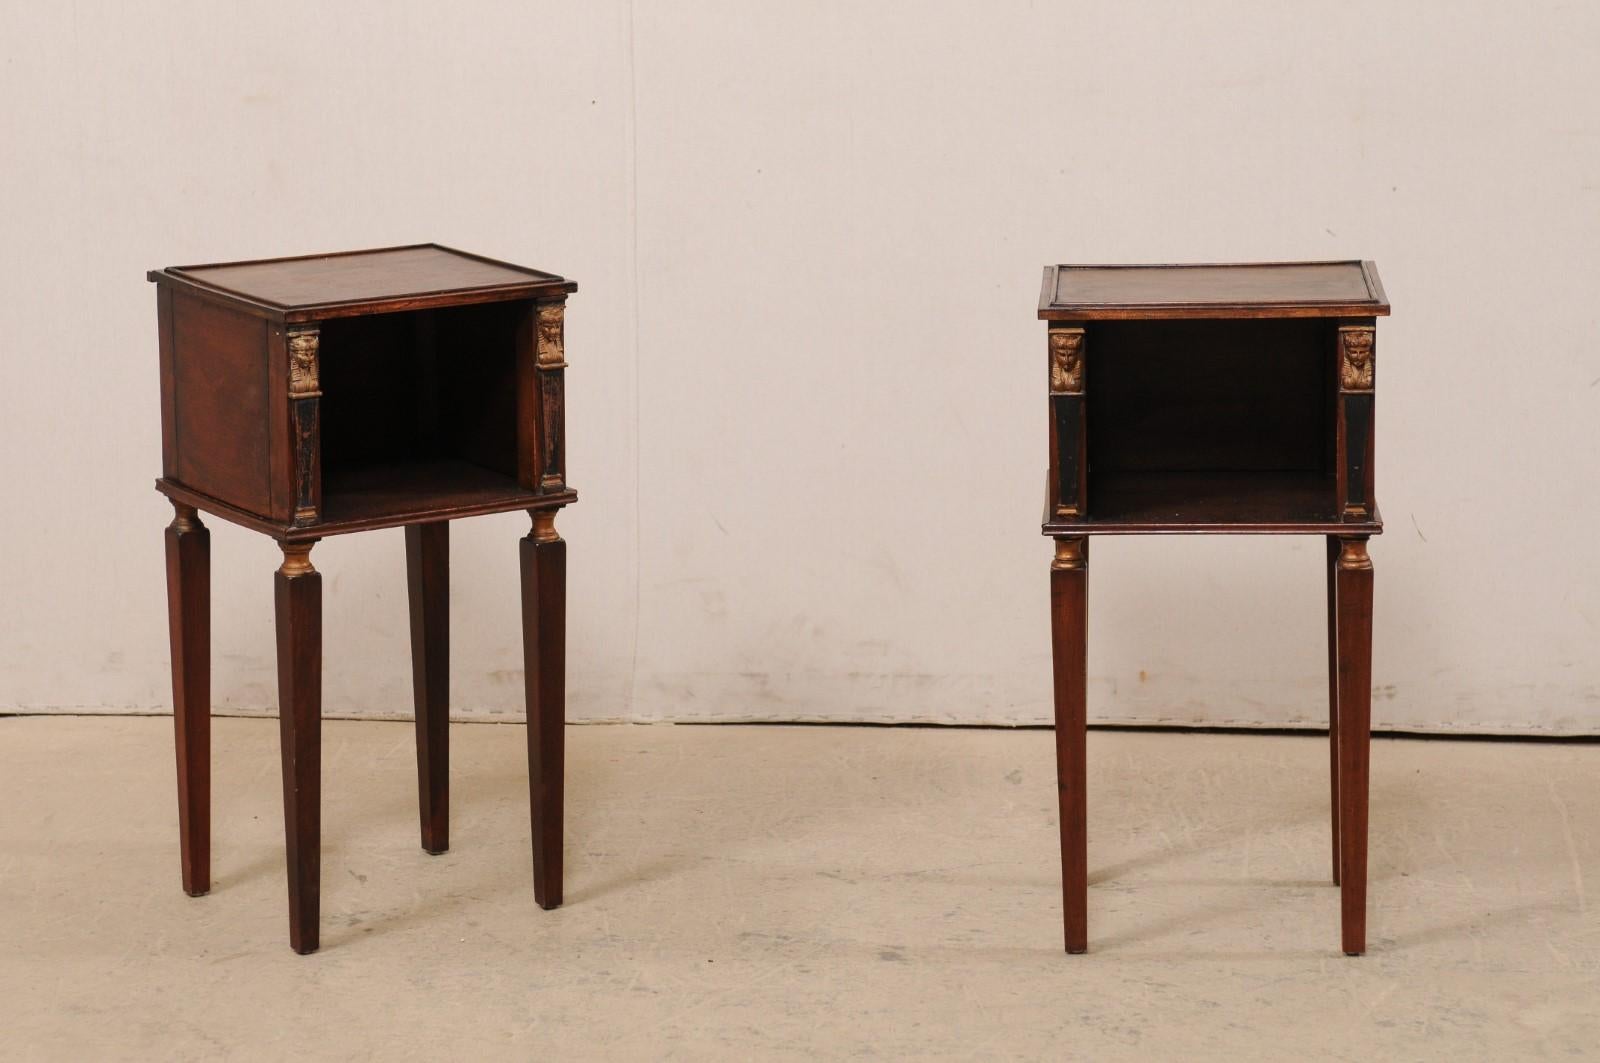 A French pair of smaller-sized side tables, with cubie shelf and Egyptian Revival accents, from the turn of the 19th and 20th century. This antique pair of tables from France each feature a mostly-square shaped top with subtle raised rim, resting